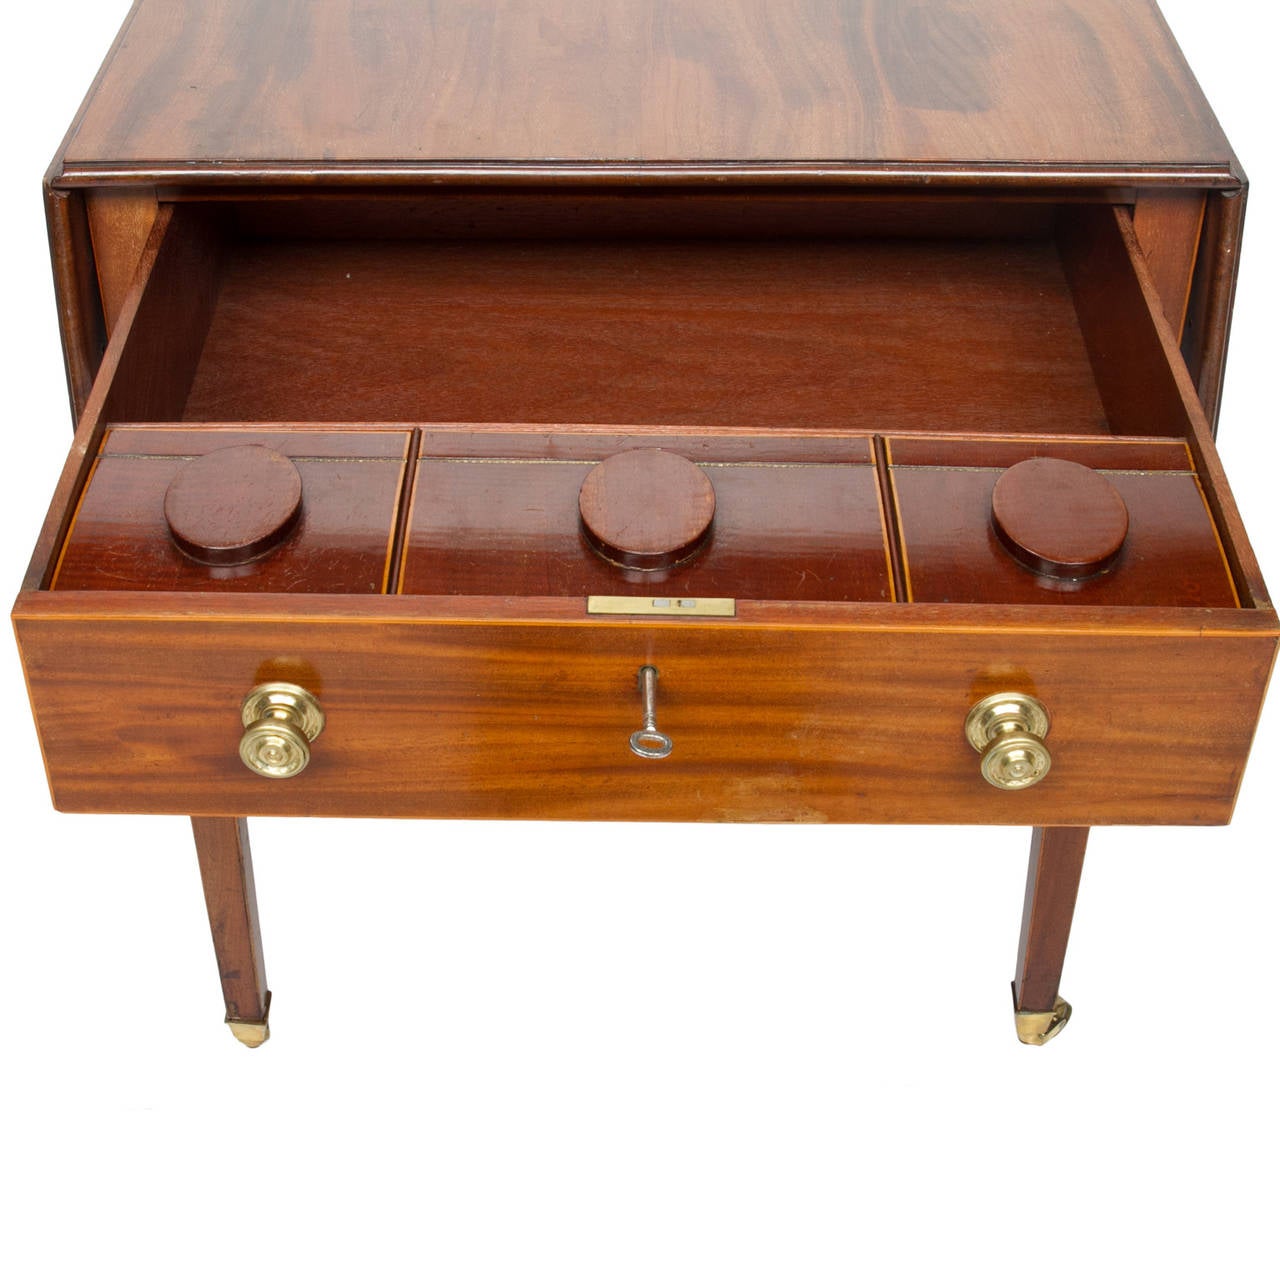 British 19th Century English Pembroke Table with Tea Caddies in the Drawers